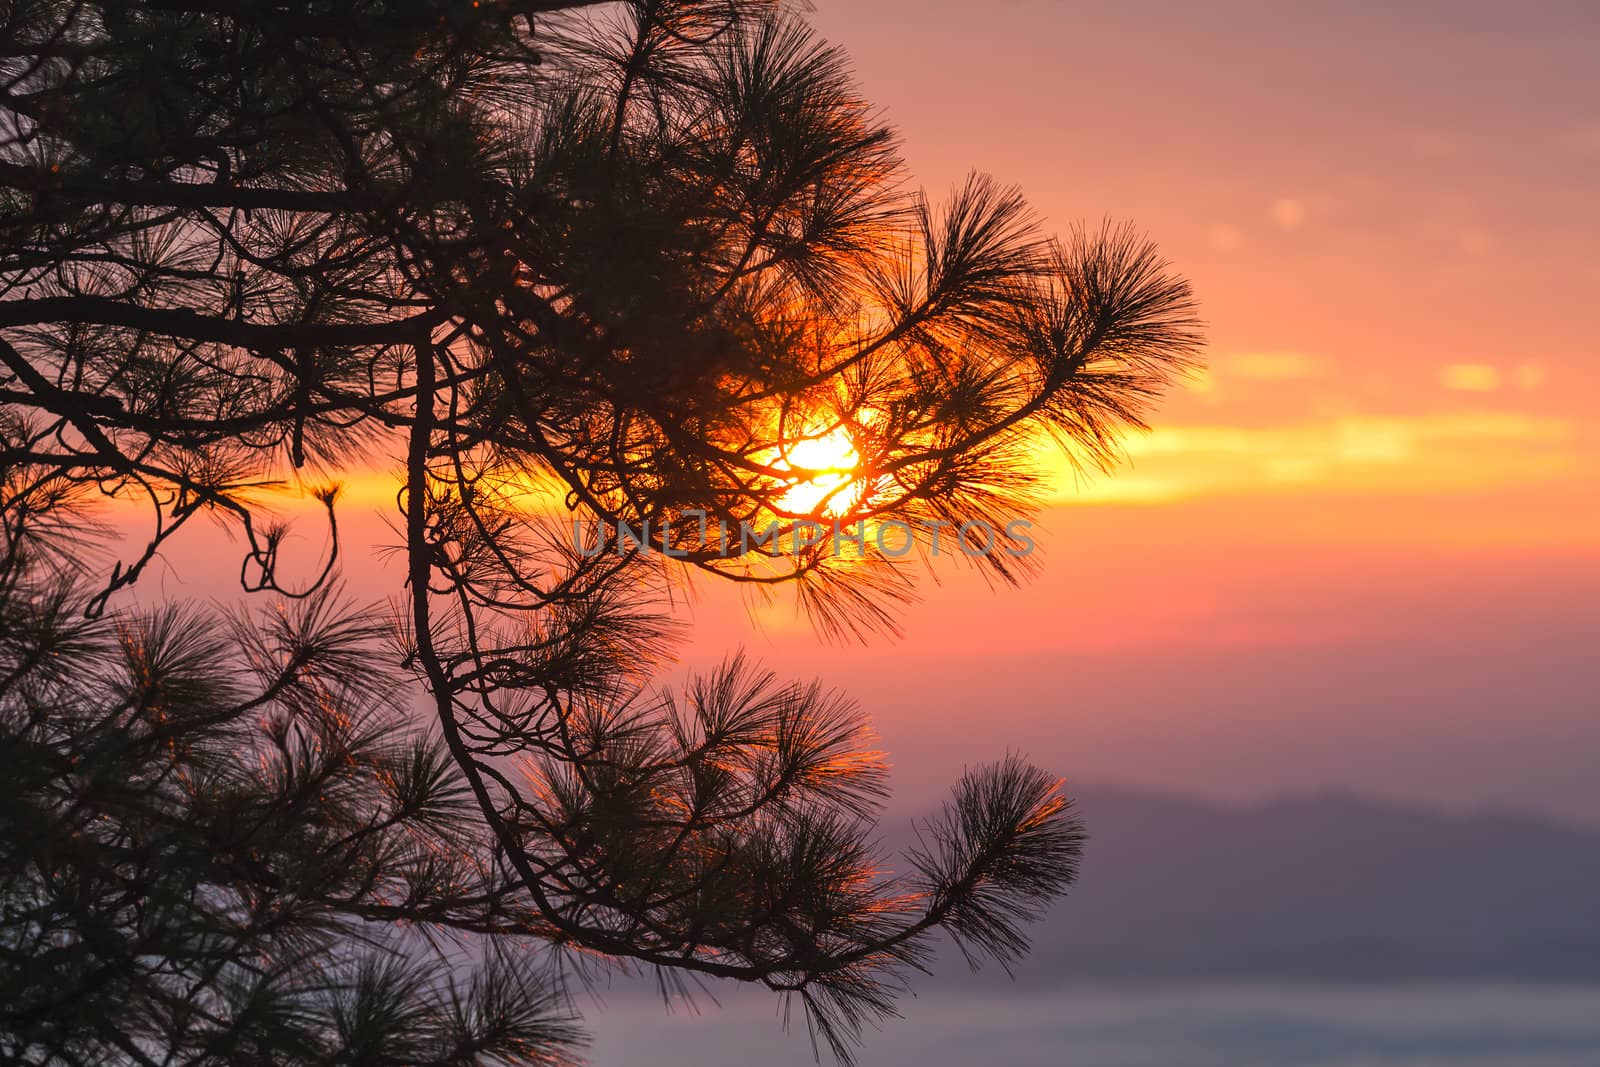 Sunset through pine branches by jame_j@homail.com